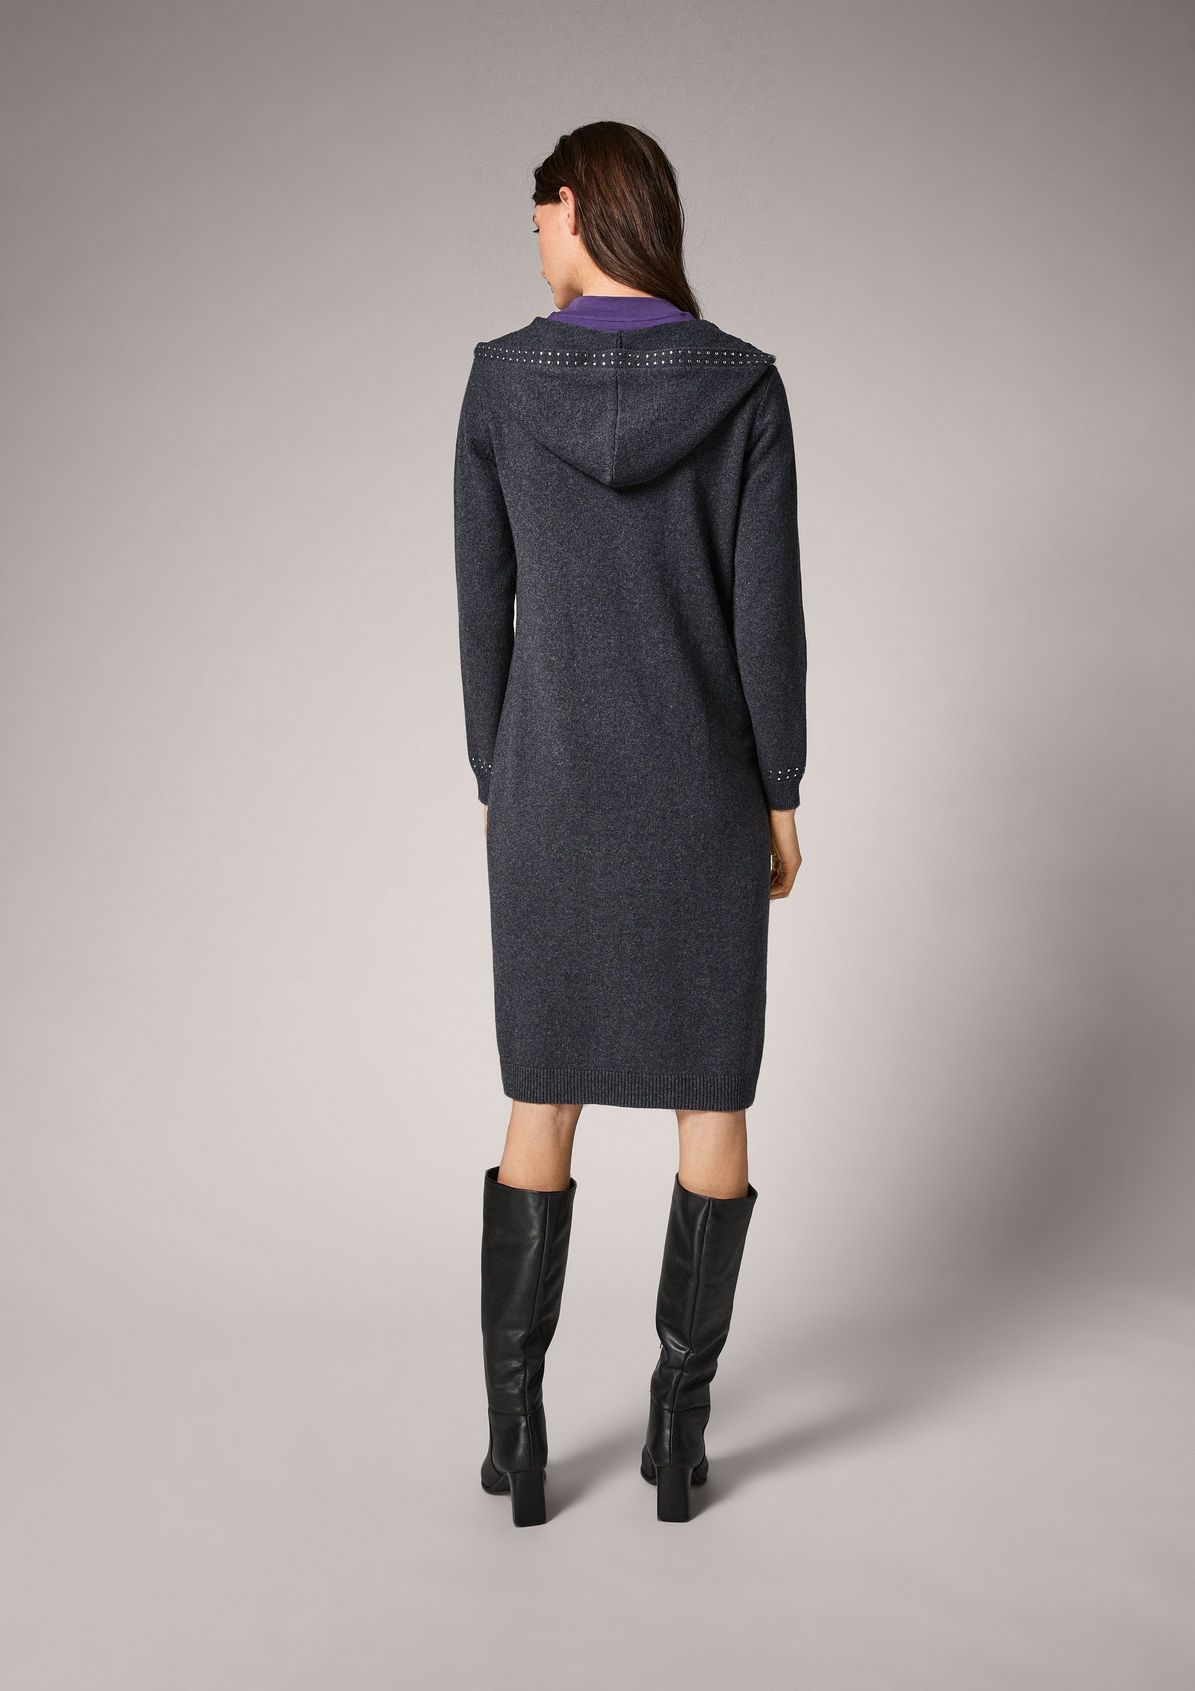 Wool blend dress with studs from comma